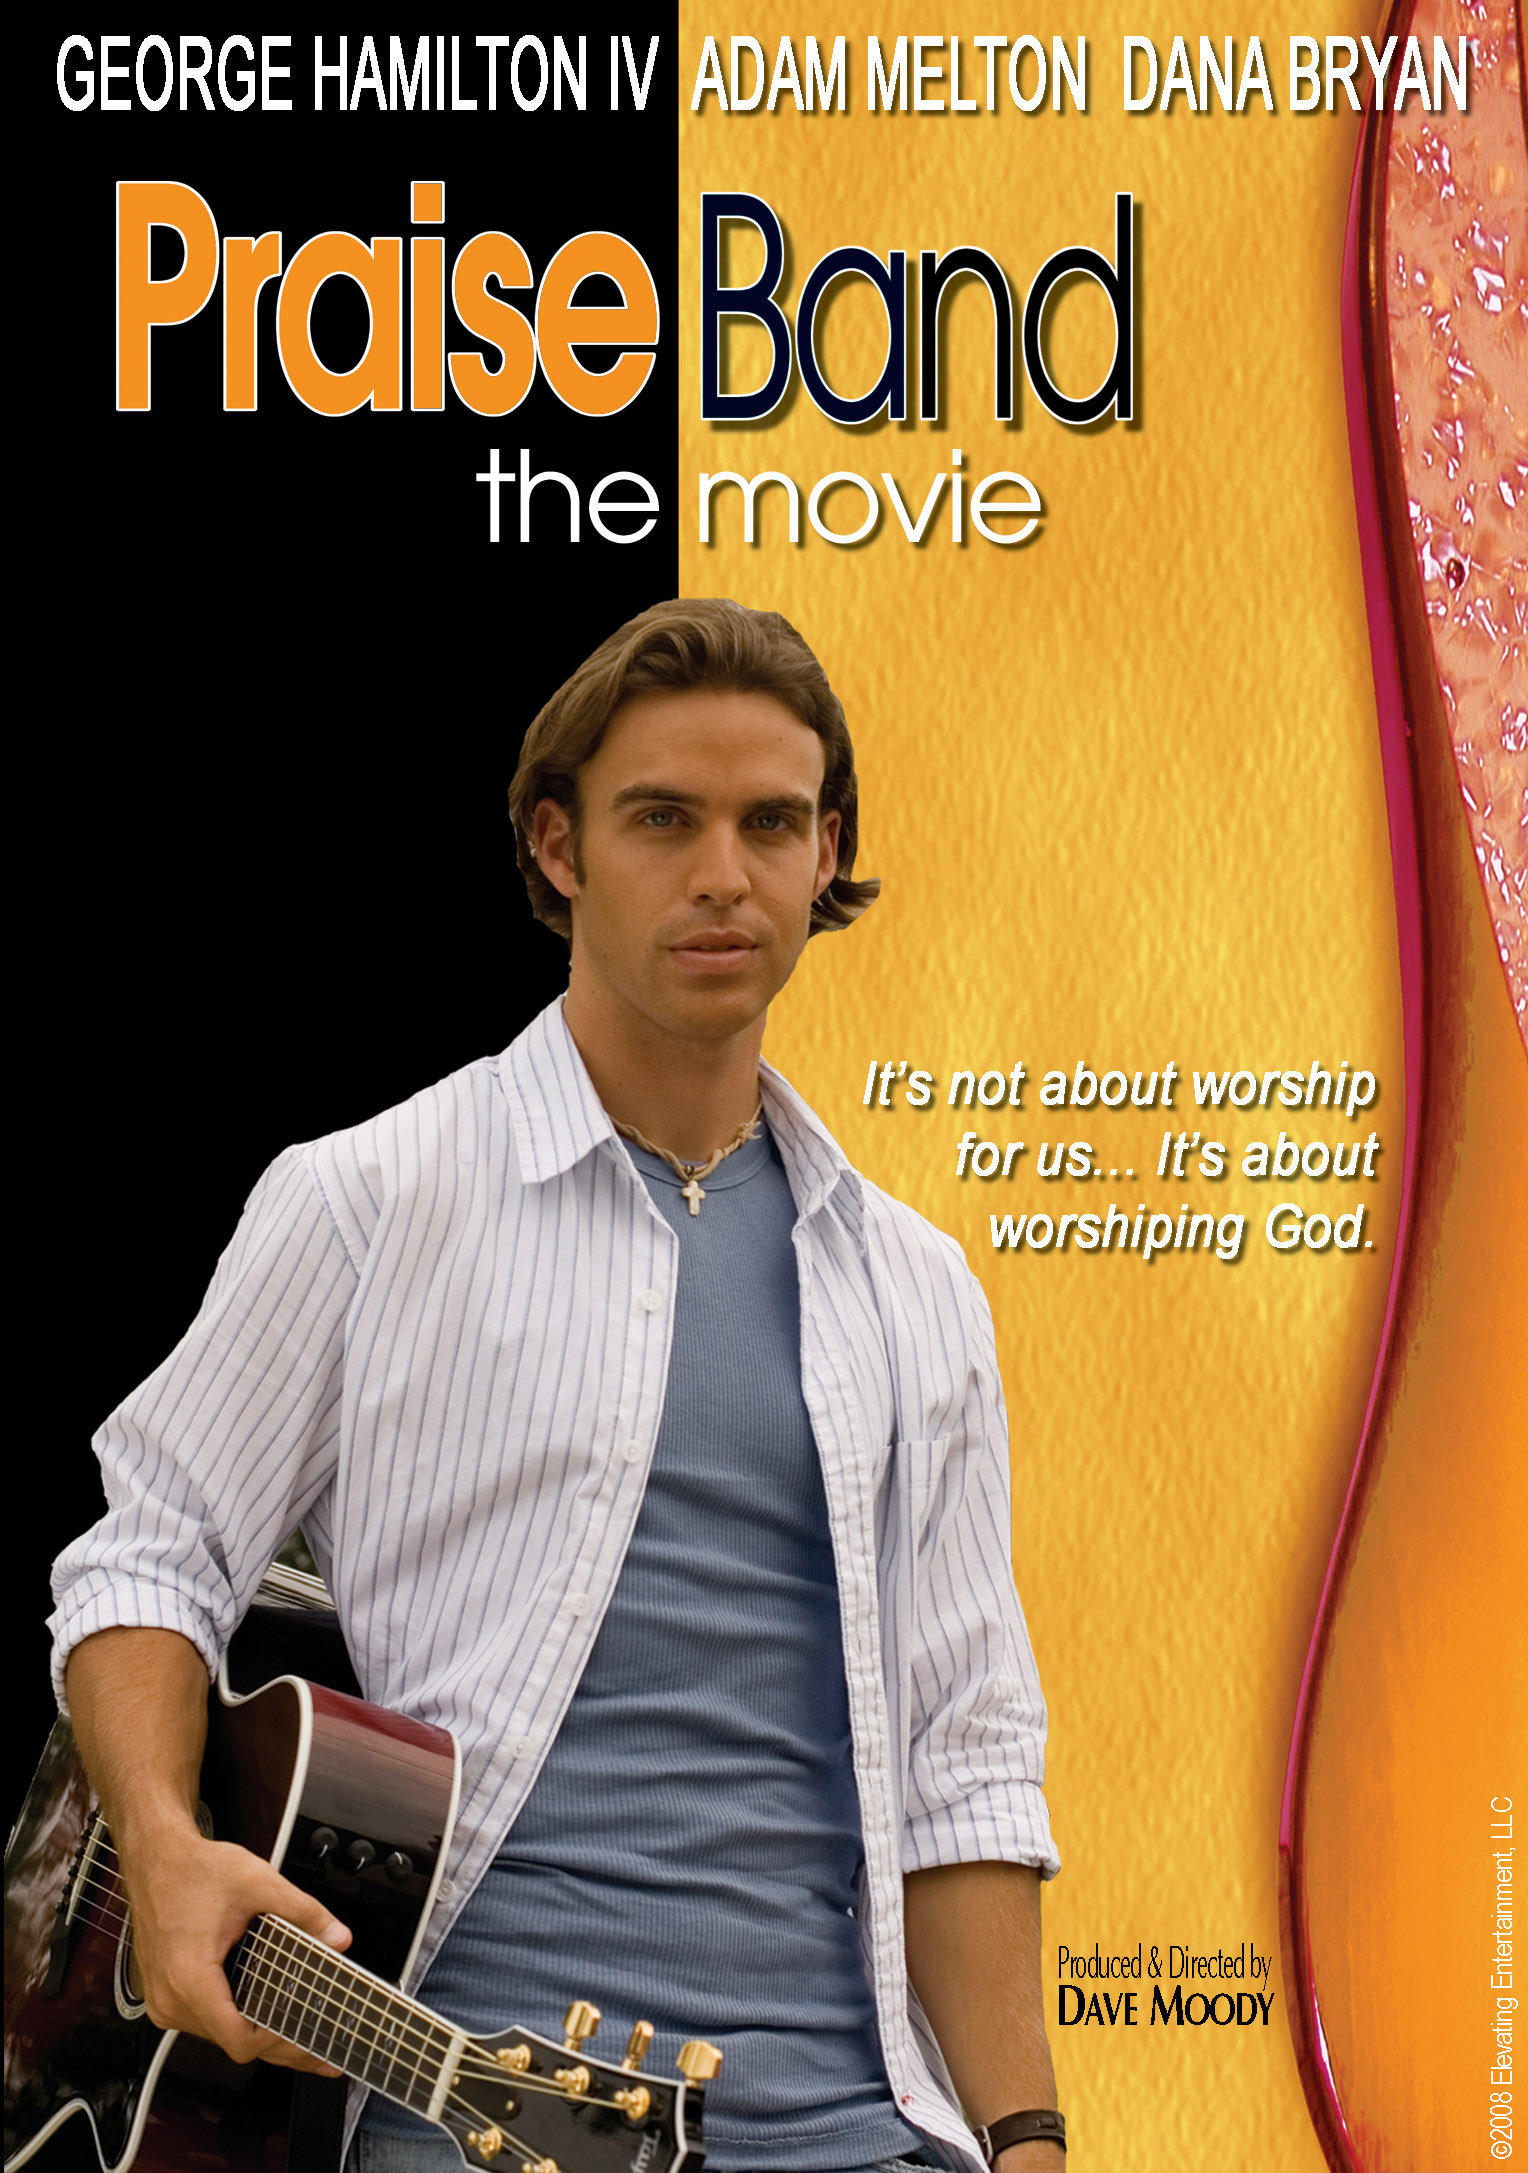 Praise Band: The Movie, directed by Dave Moody, written by Josh Moody